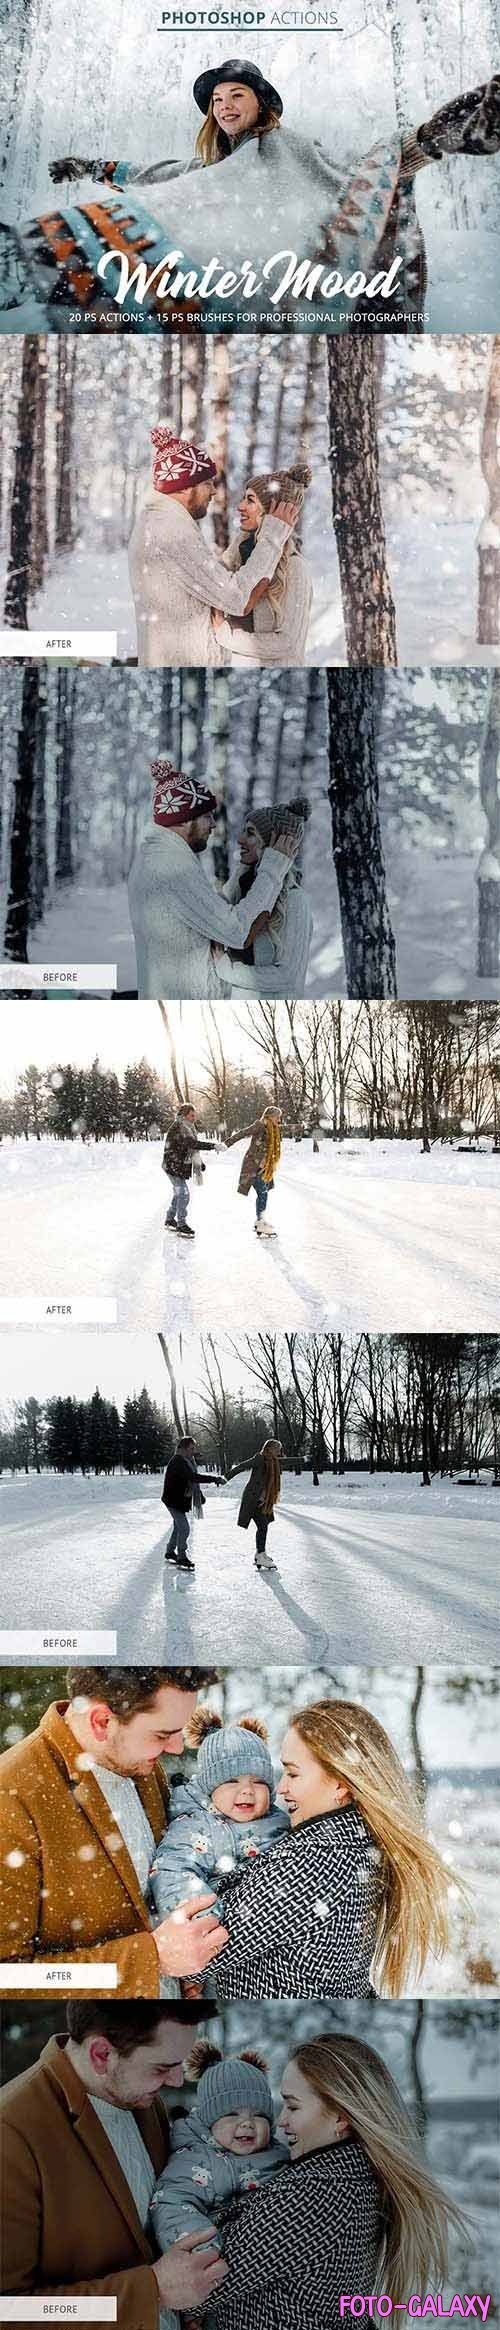 CreativeMarket - Winter Mood Actions for Photoshop - 4849563